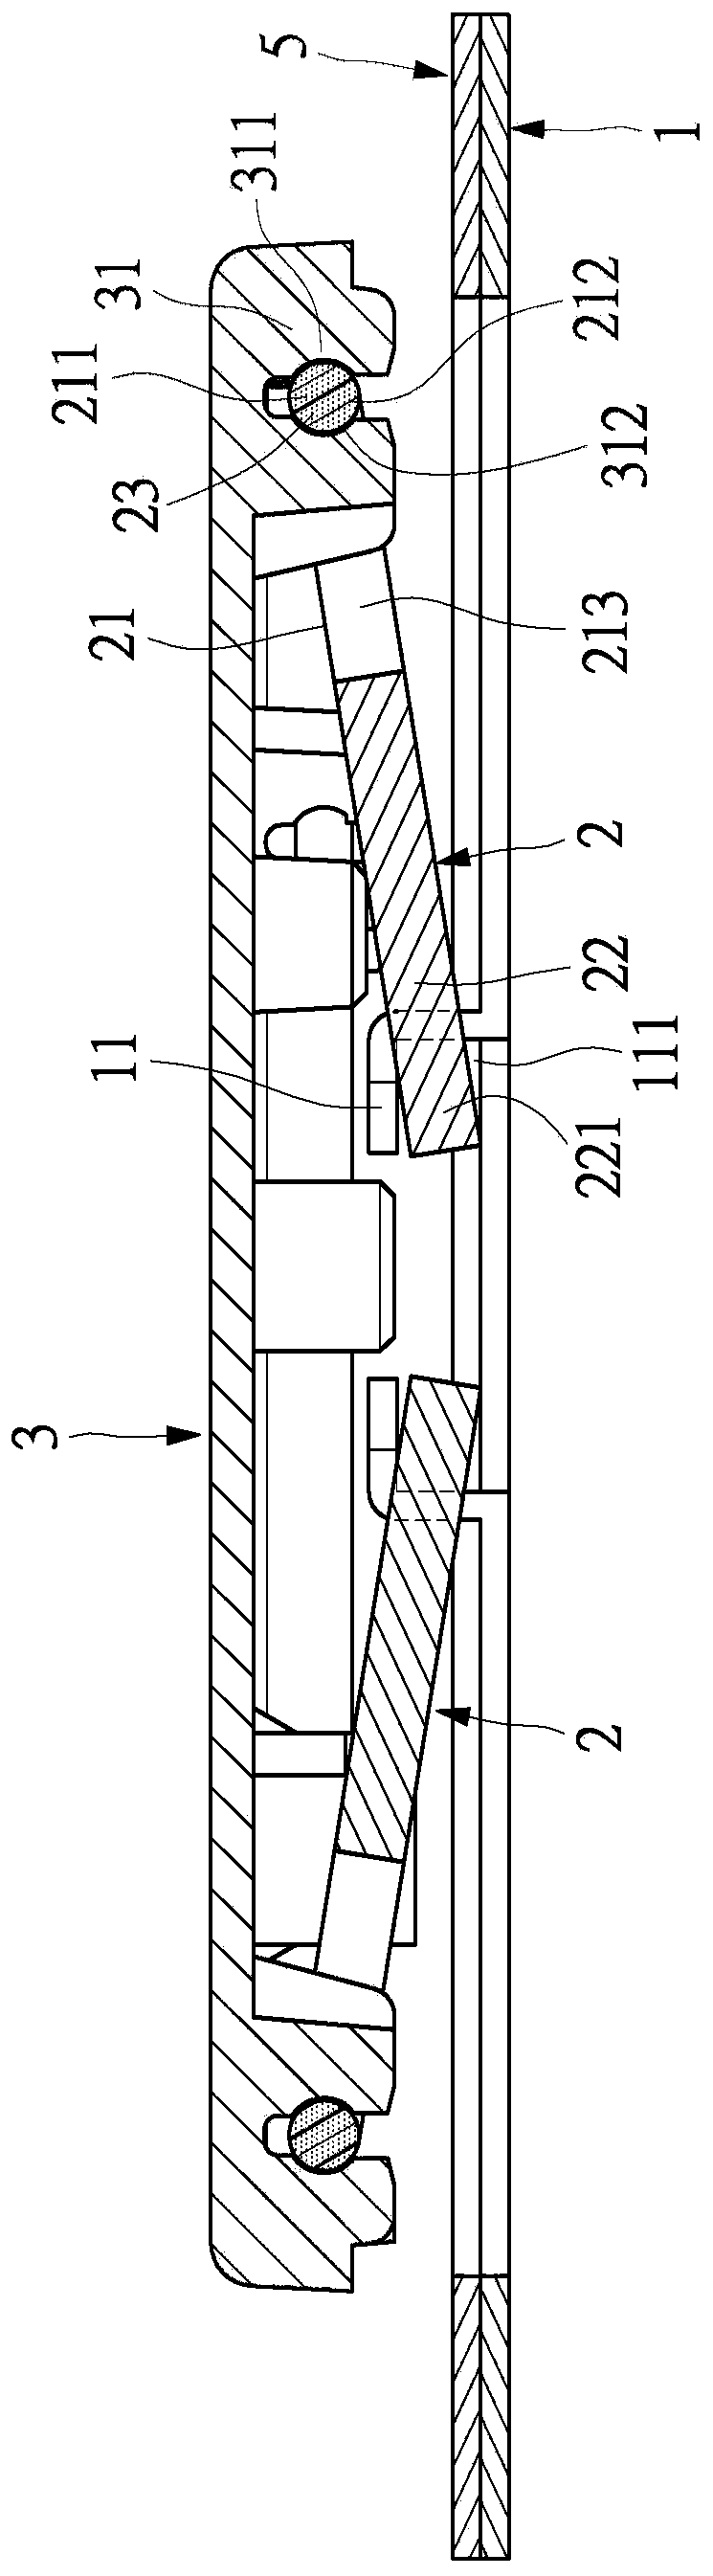 Button device and its balance bar structure